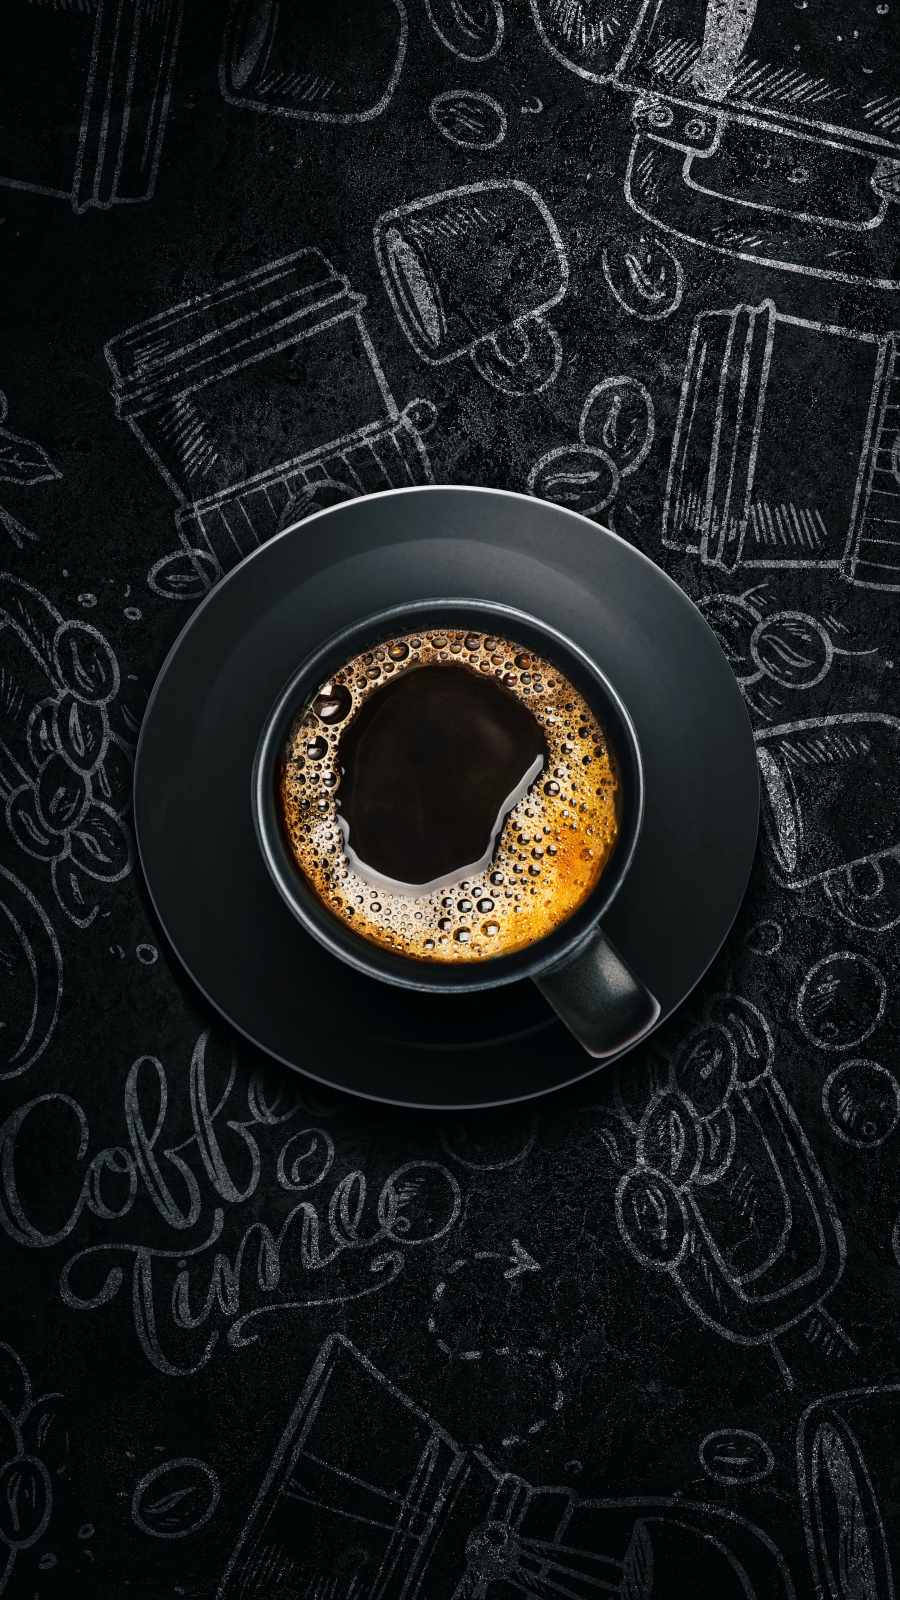 Time for Coffee Wallpaper / Excellent Coffee Wallpaper / Cafe - Etsy